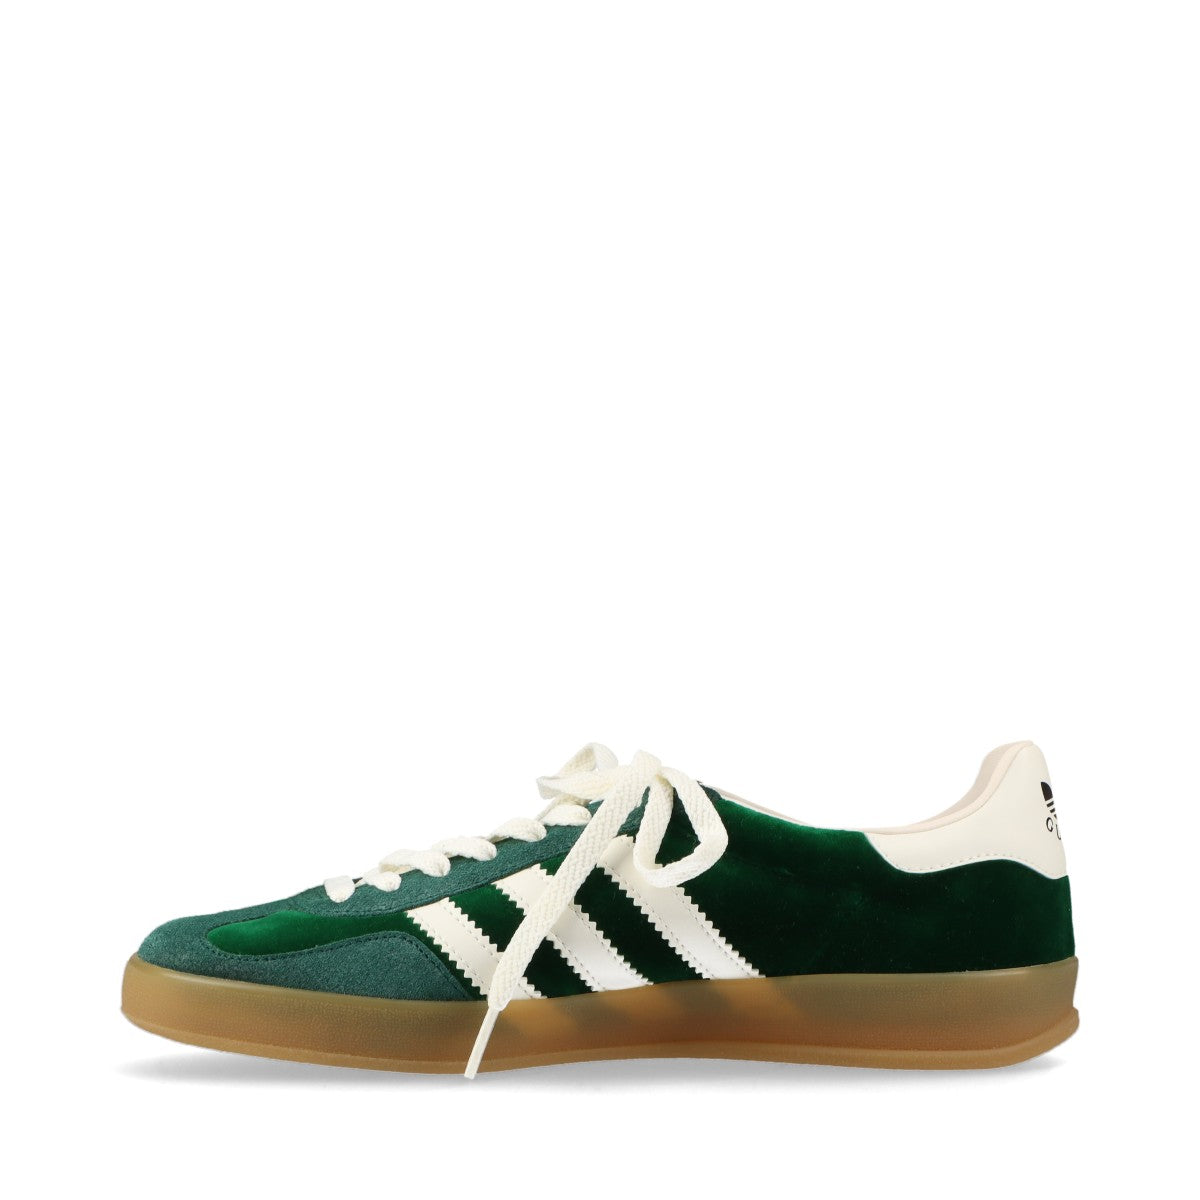 Gucci x Adidas Gazelle Velour & leather Sneakers 24.5cm Ladies' Green 707848 Replacement Laces Included Box There is a bag